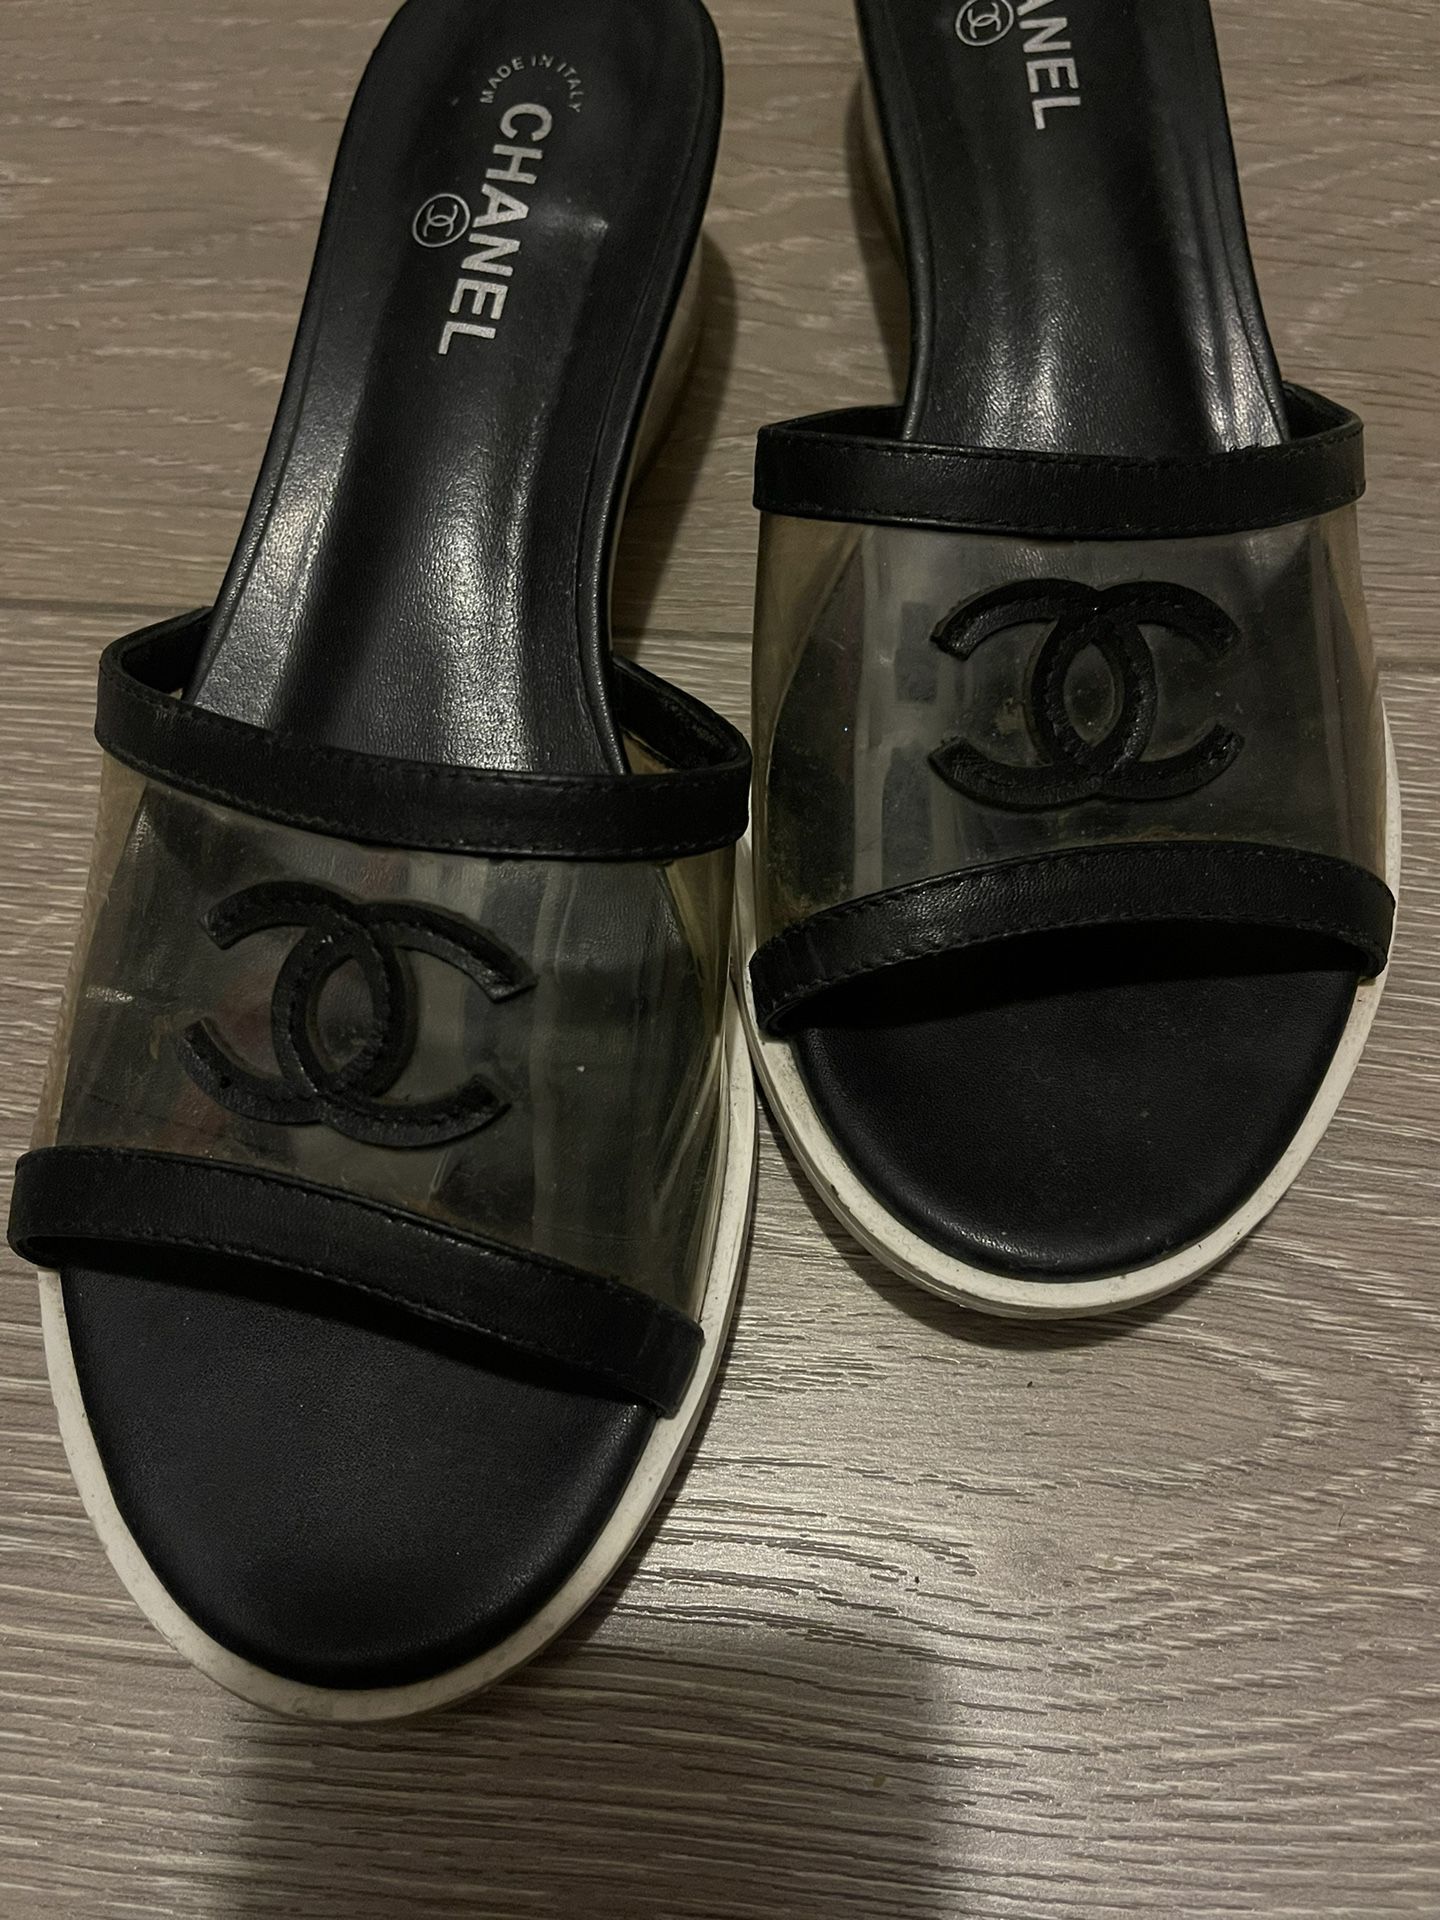 Chanel Sneakers for Sale in Garden Grove, CA - OfferUp